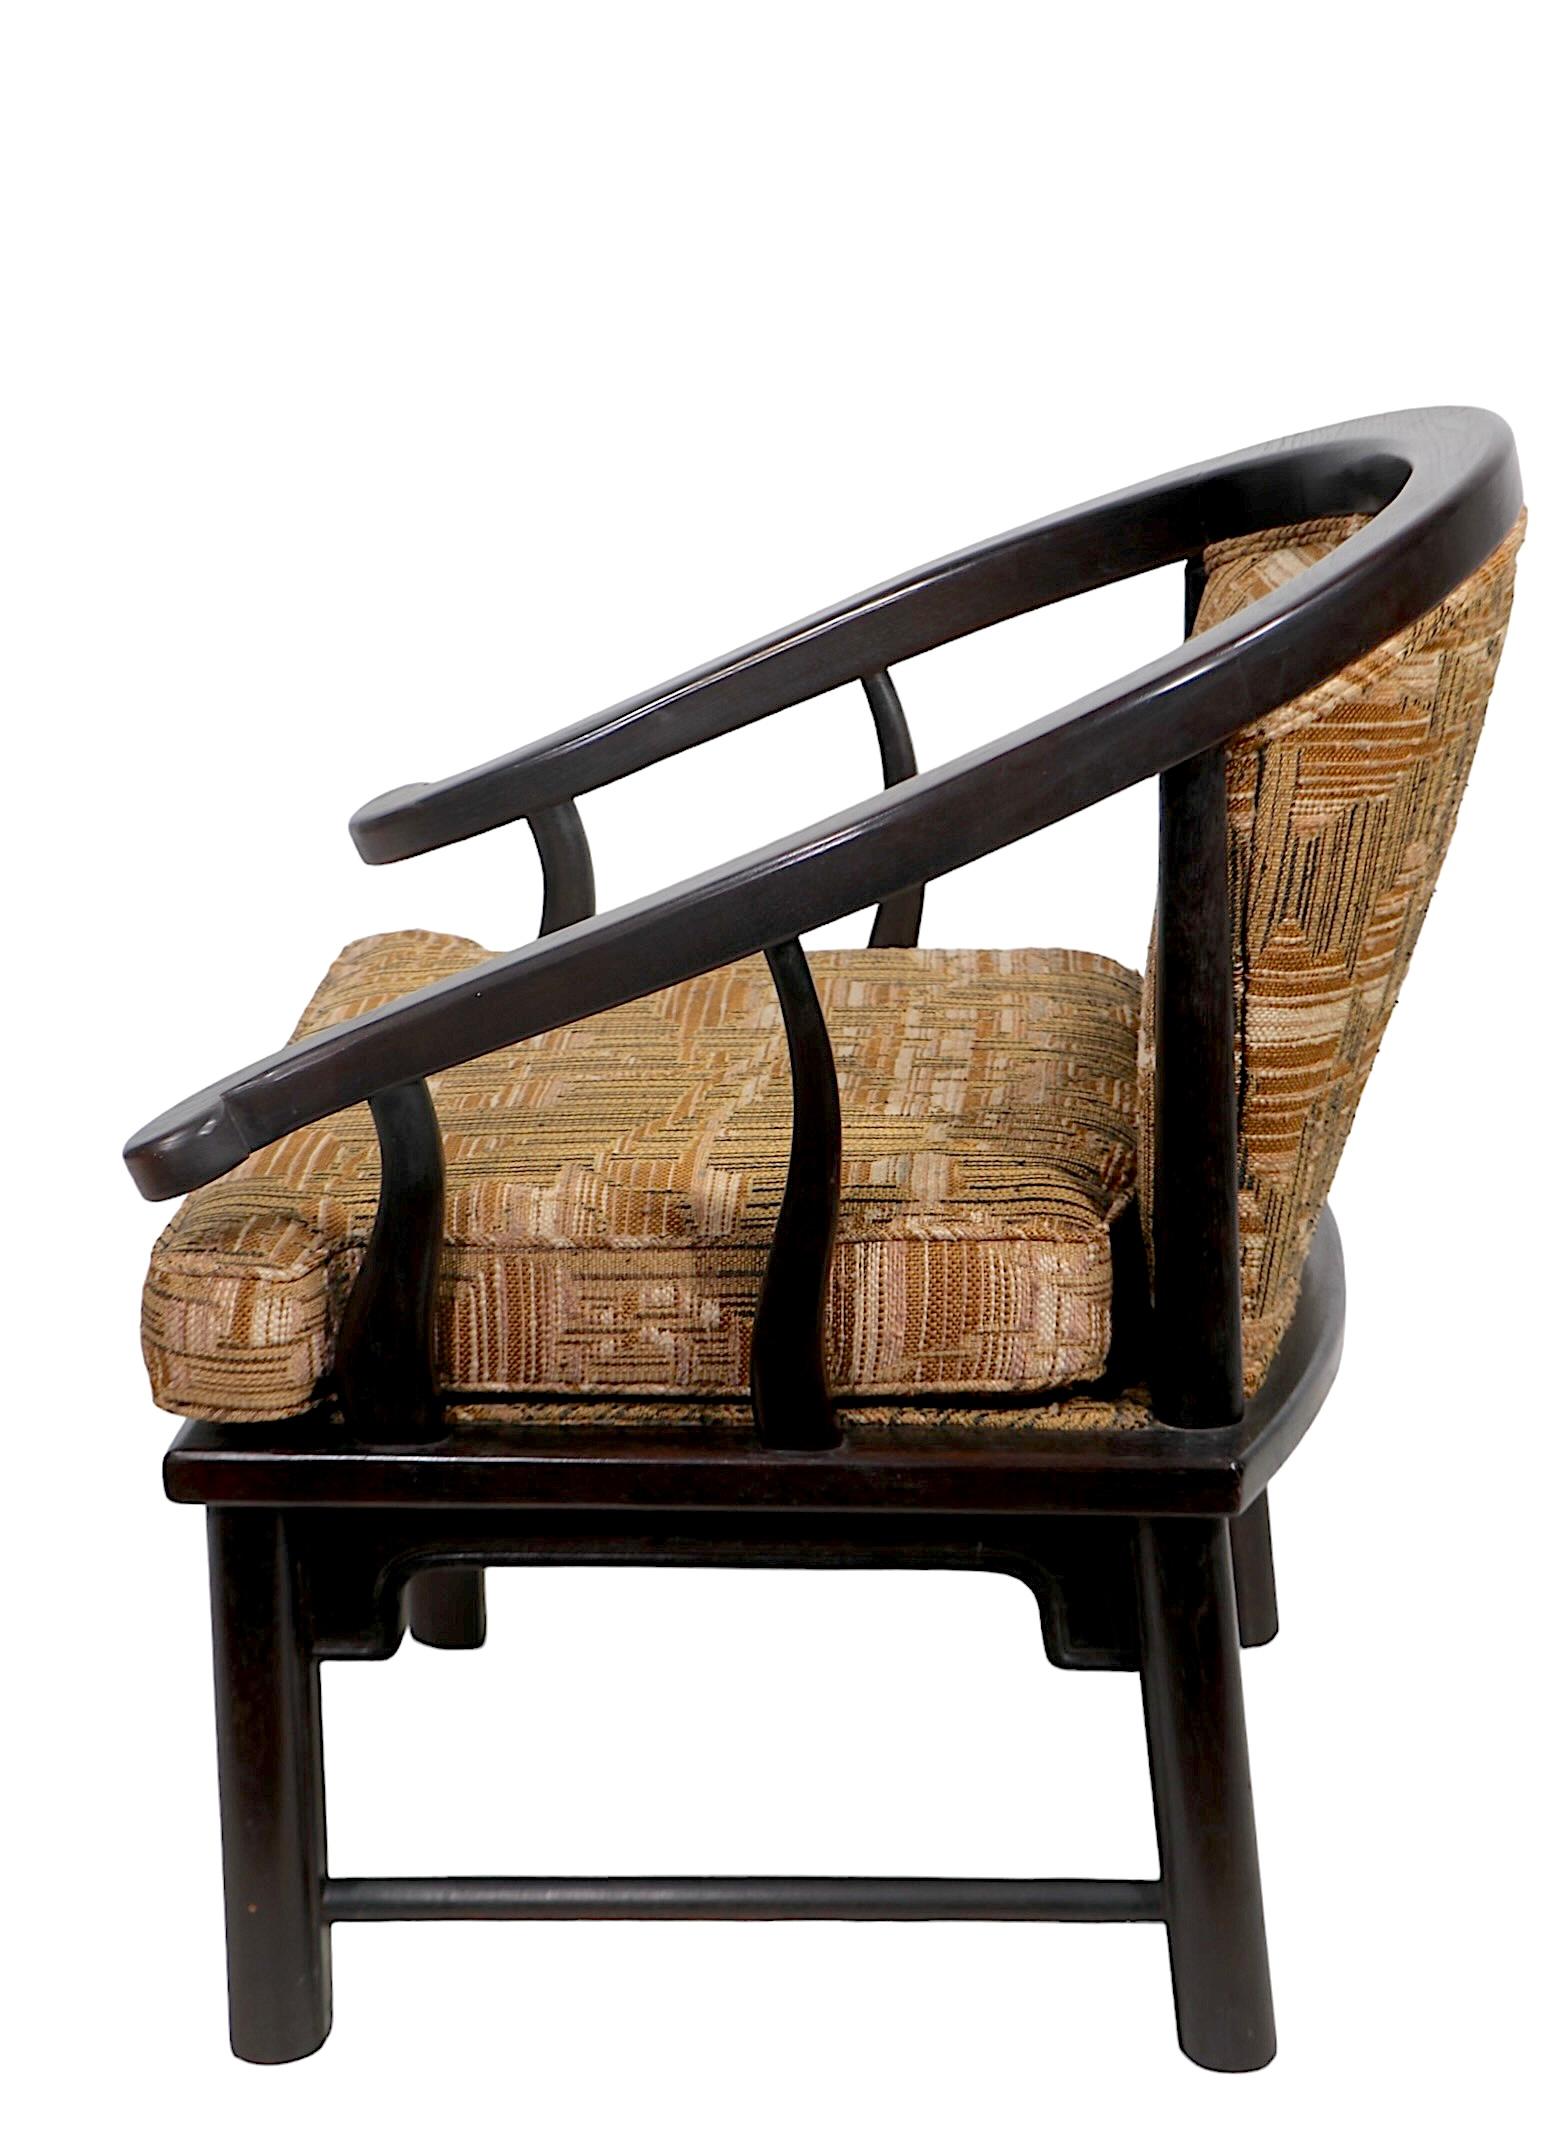 20th Century Asia Modern Chinese Horseshoe Style Lounge Chair by Century Furniture after Mont For Sale